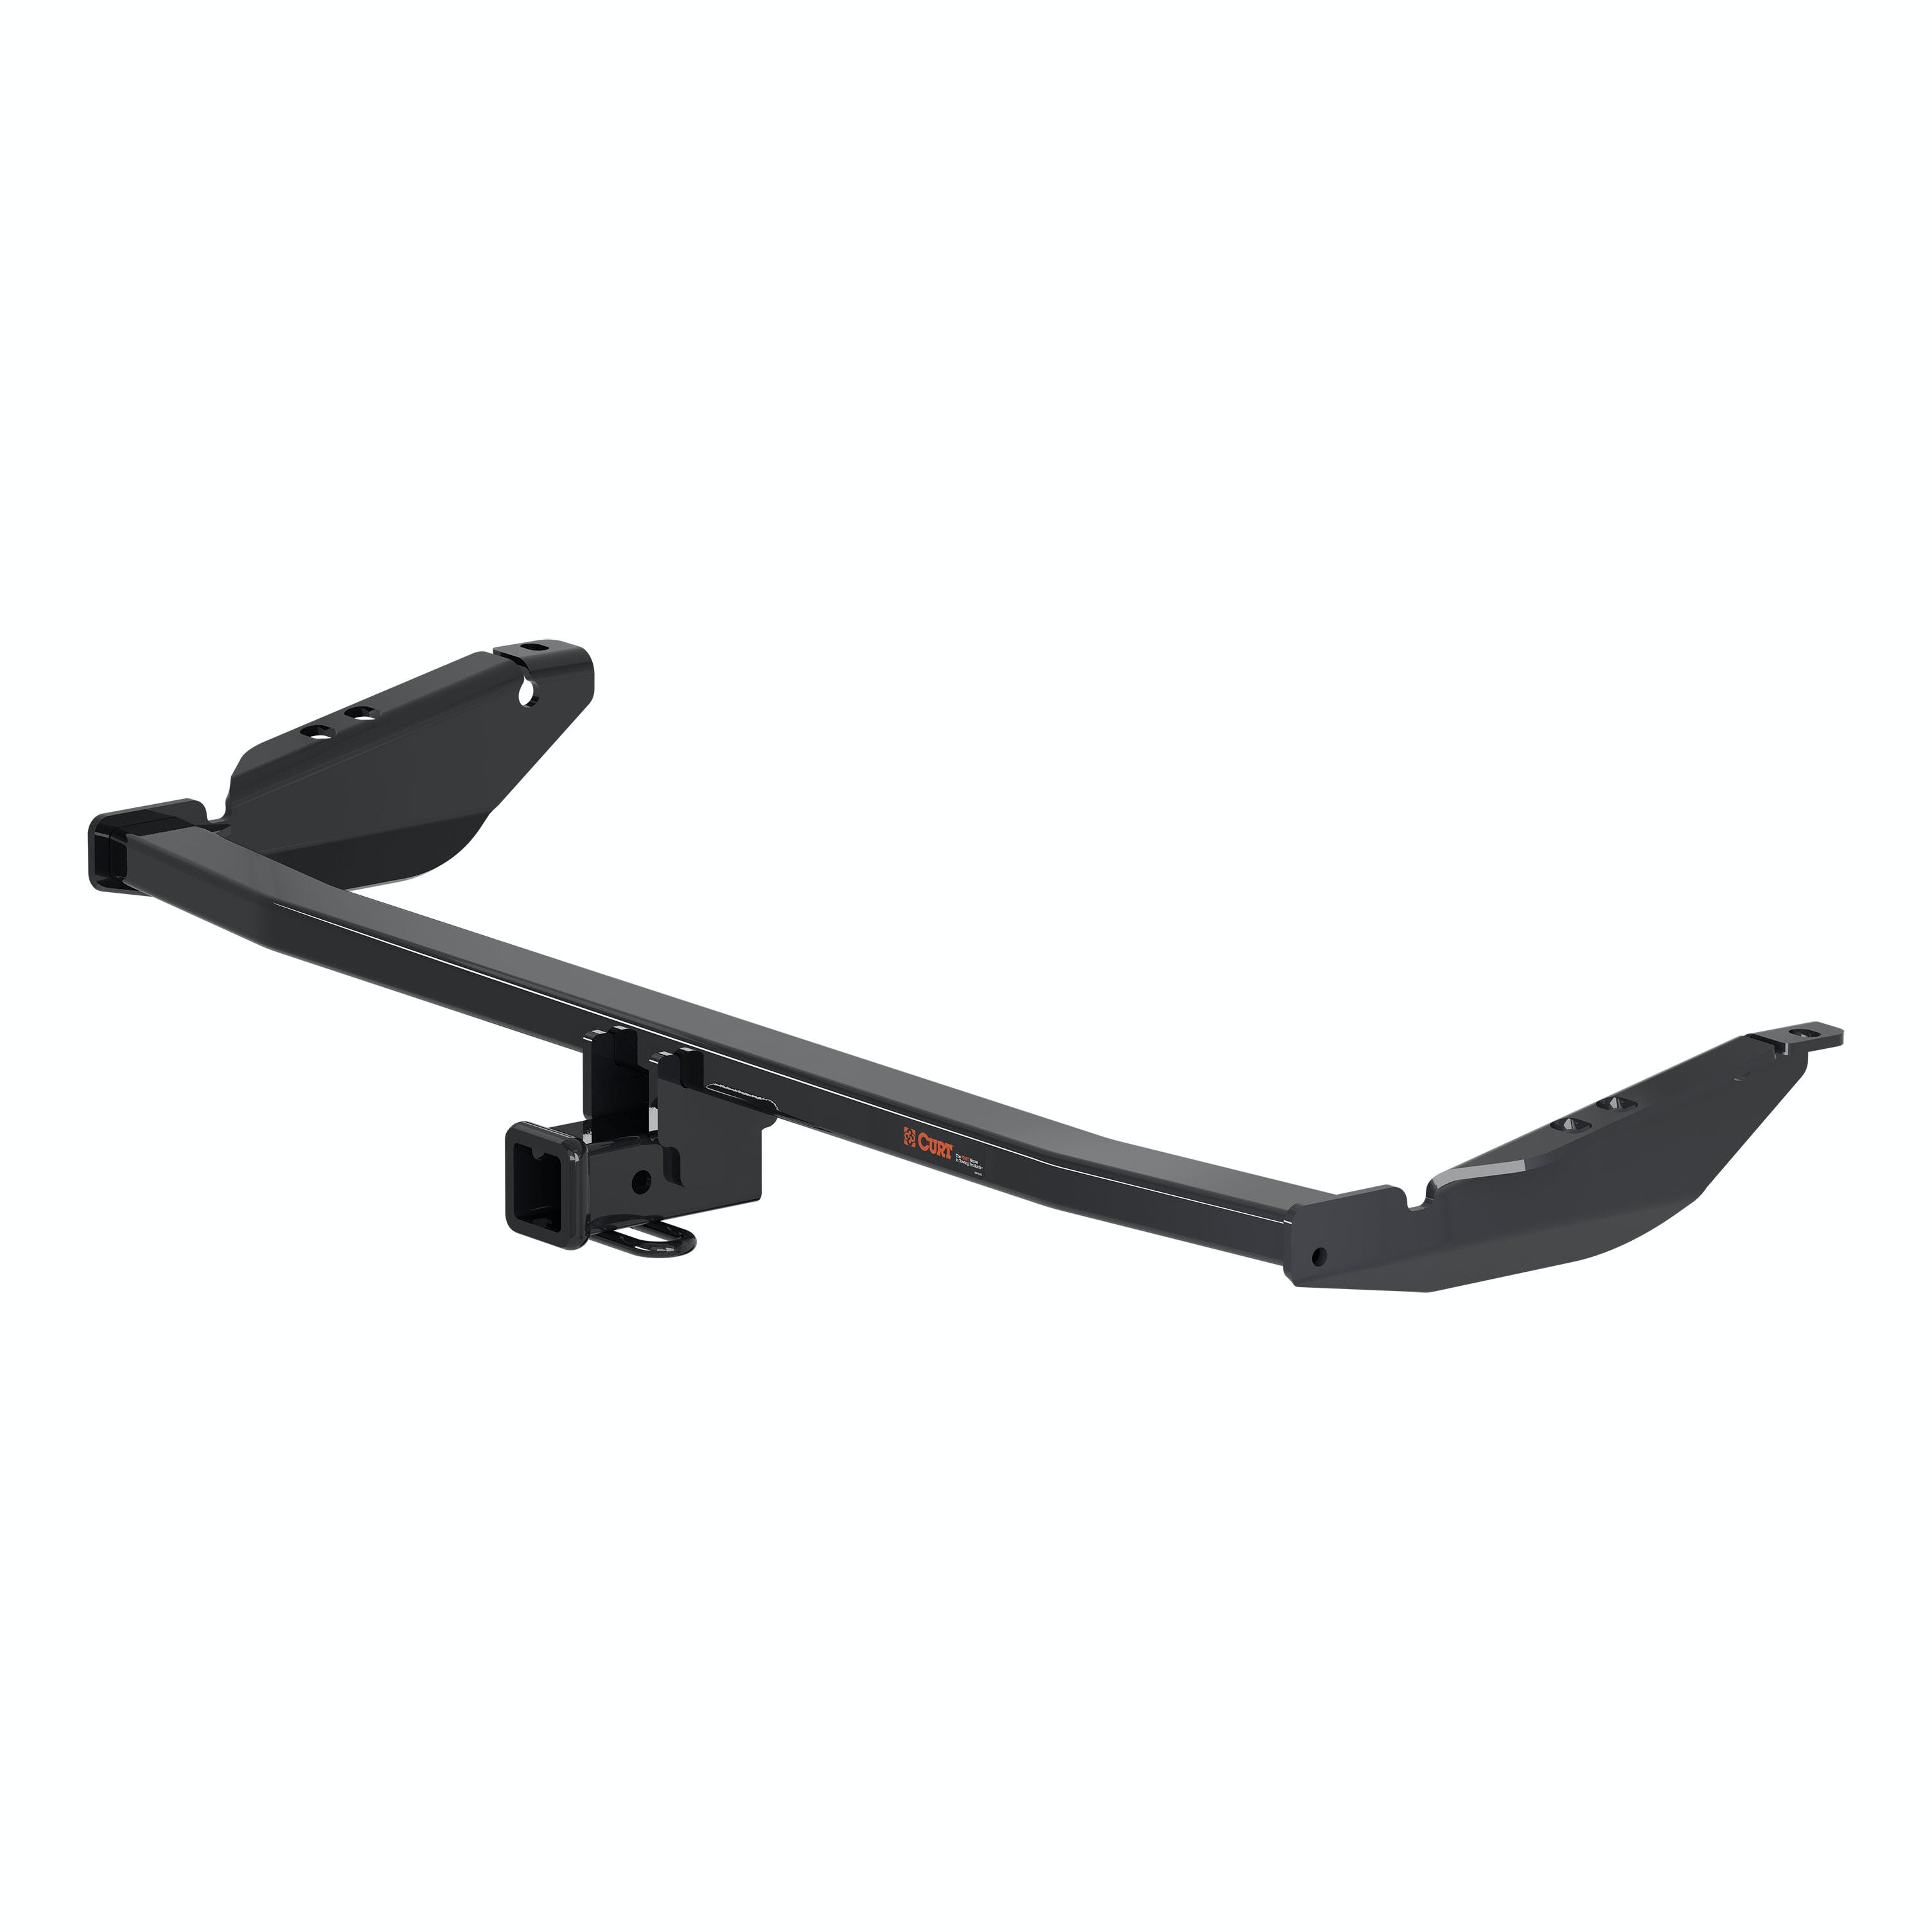 CURT 13343 Class 3 Trailer Hitch, 2 Receiver, Select Toyota Sienna (Concealed Main Body)